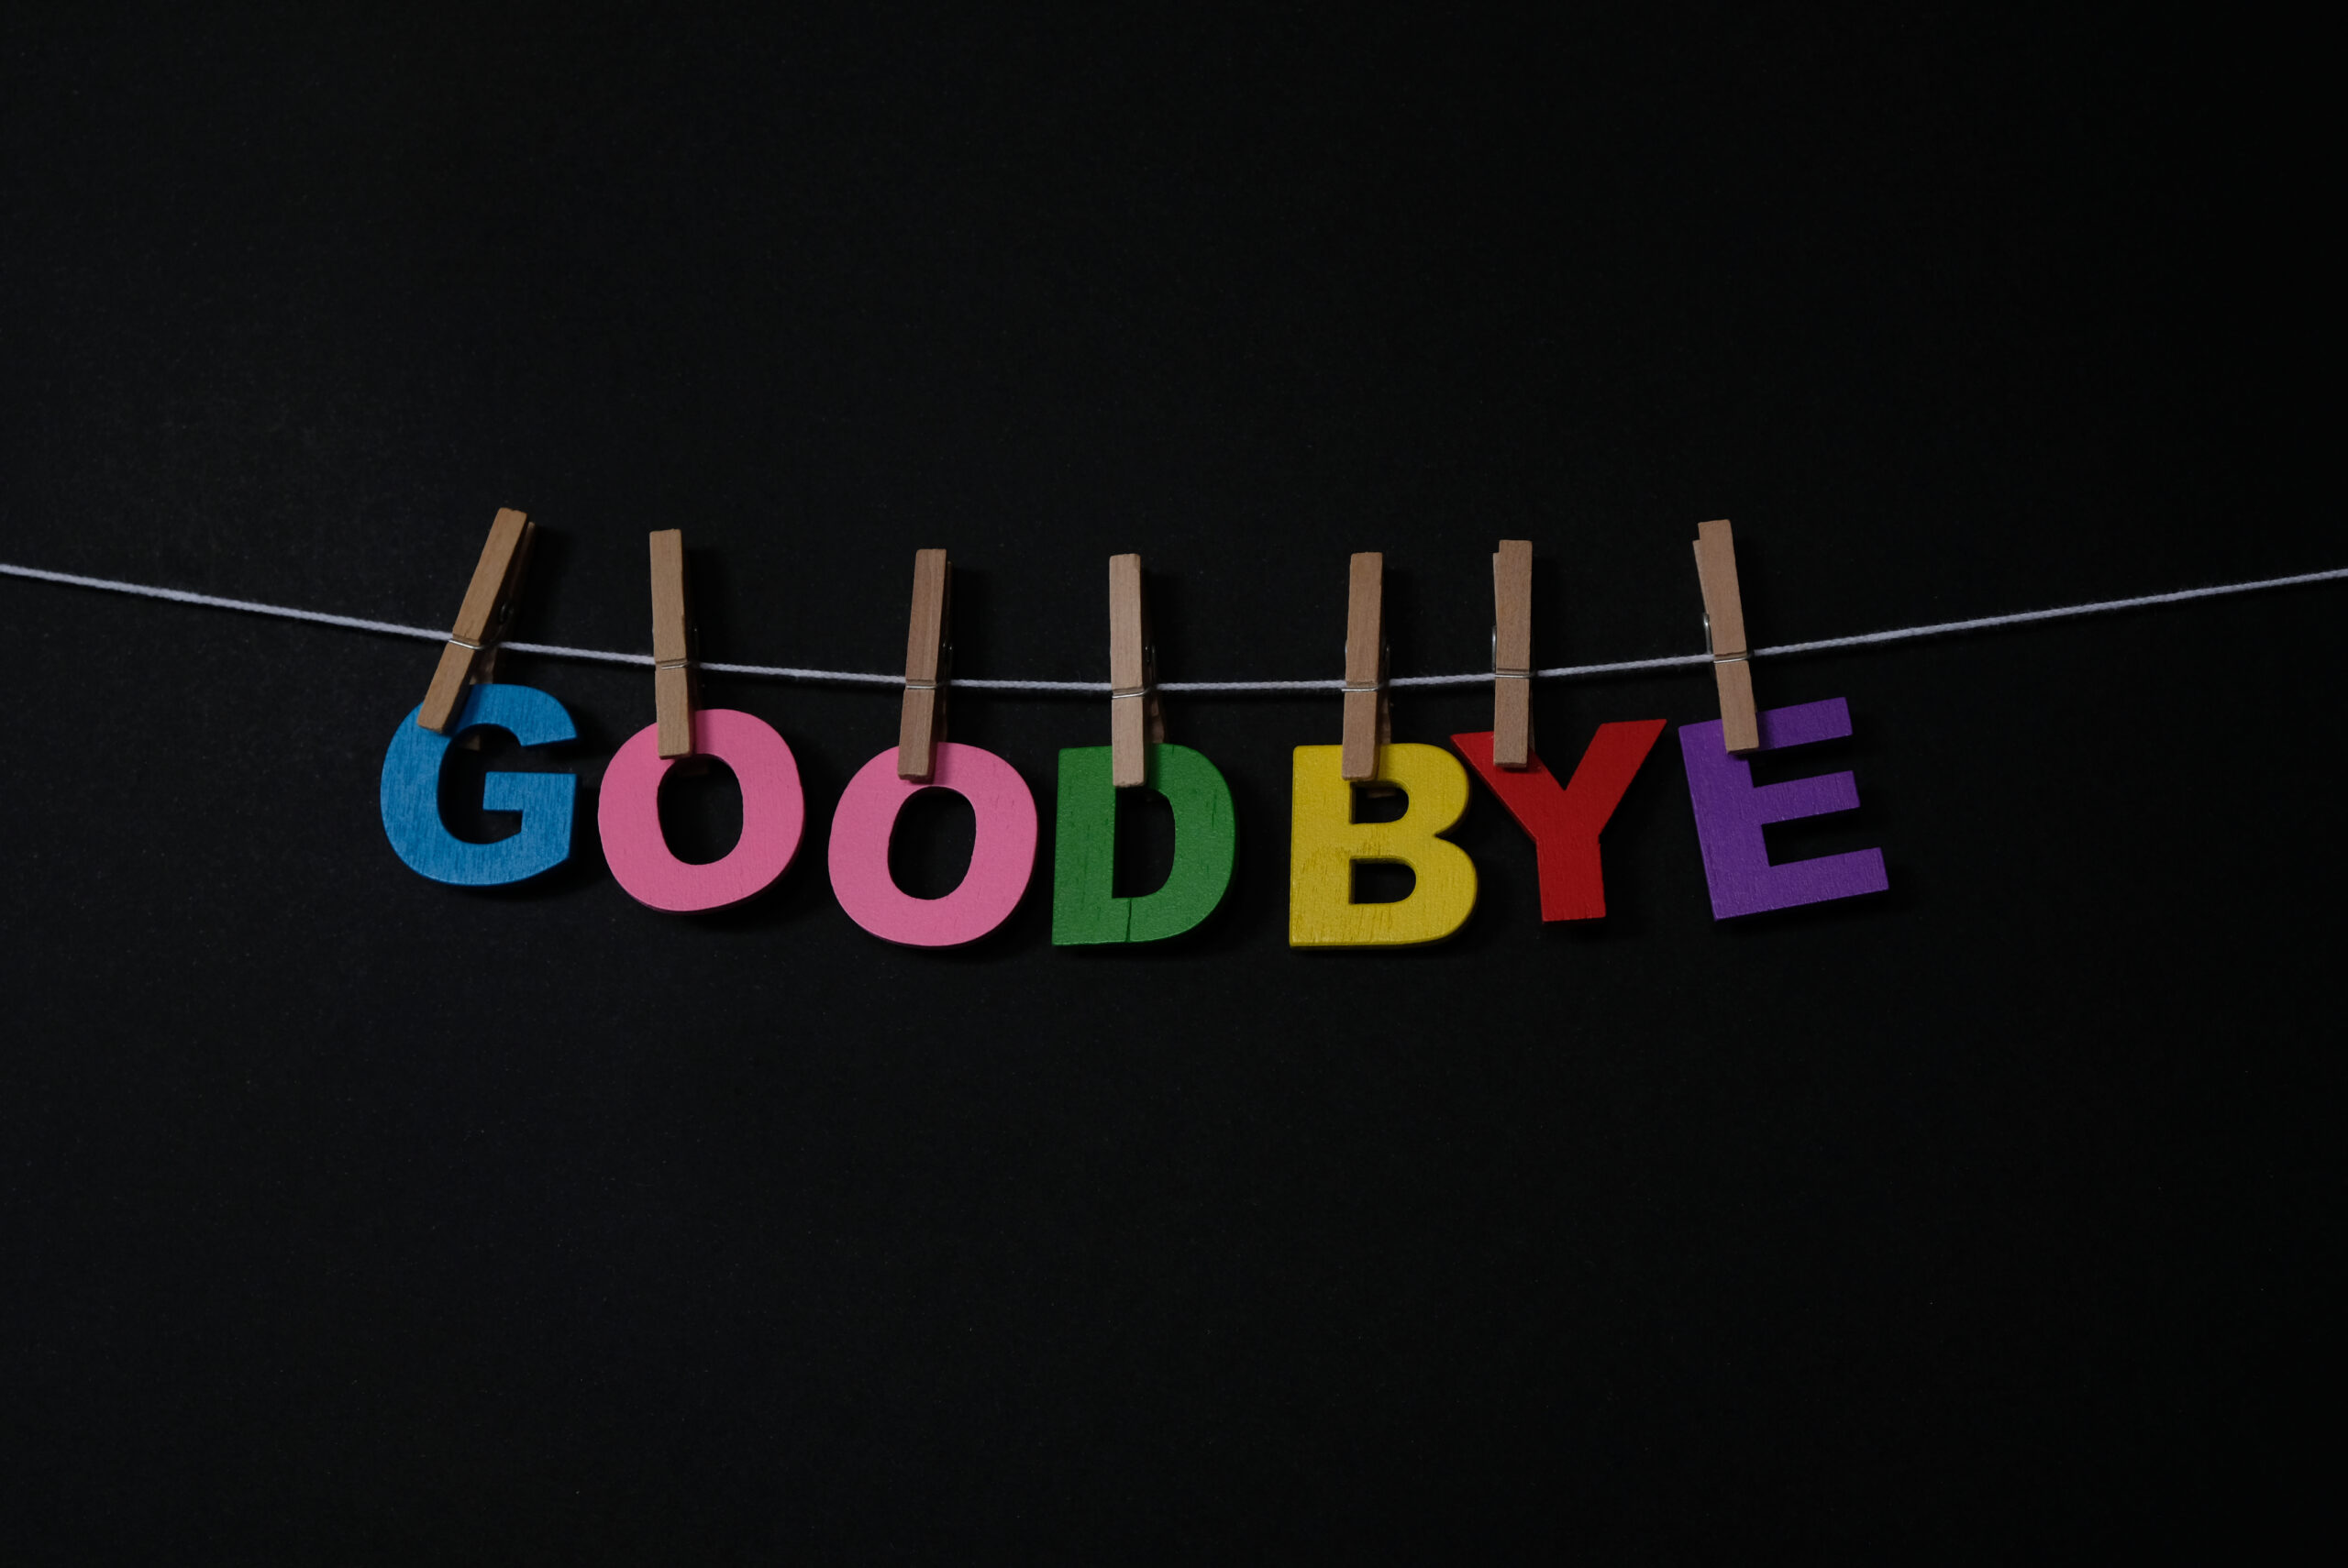 “You say goodbye…” How many ways are there to say goodbye in the Arabic language? Join us today as we look at saying goodbye in Arab speaking countries.